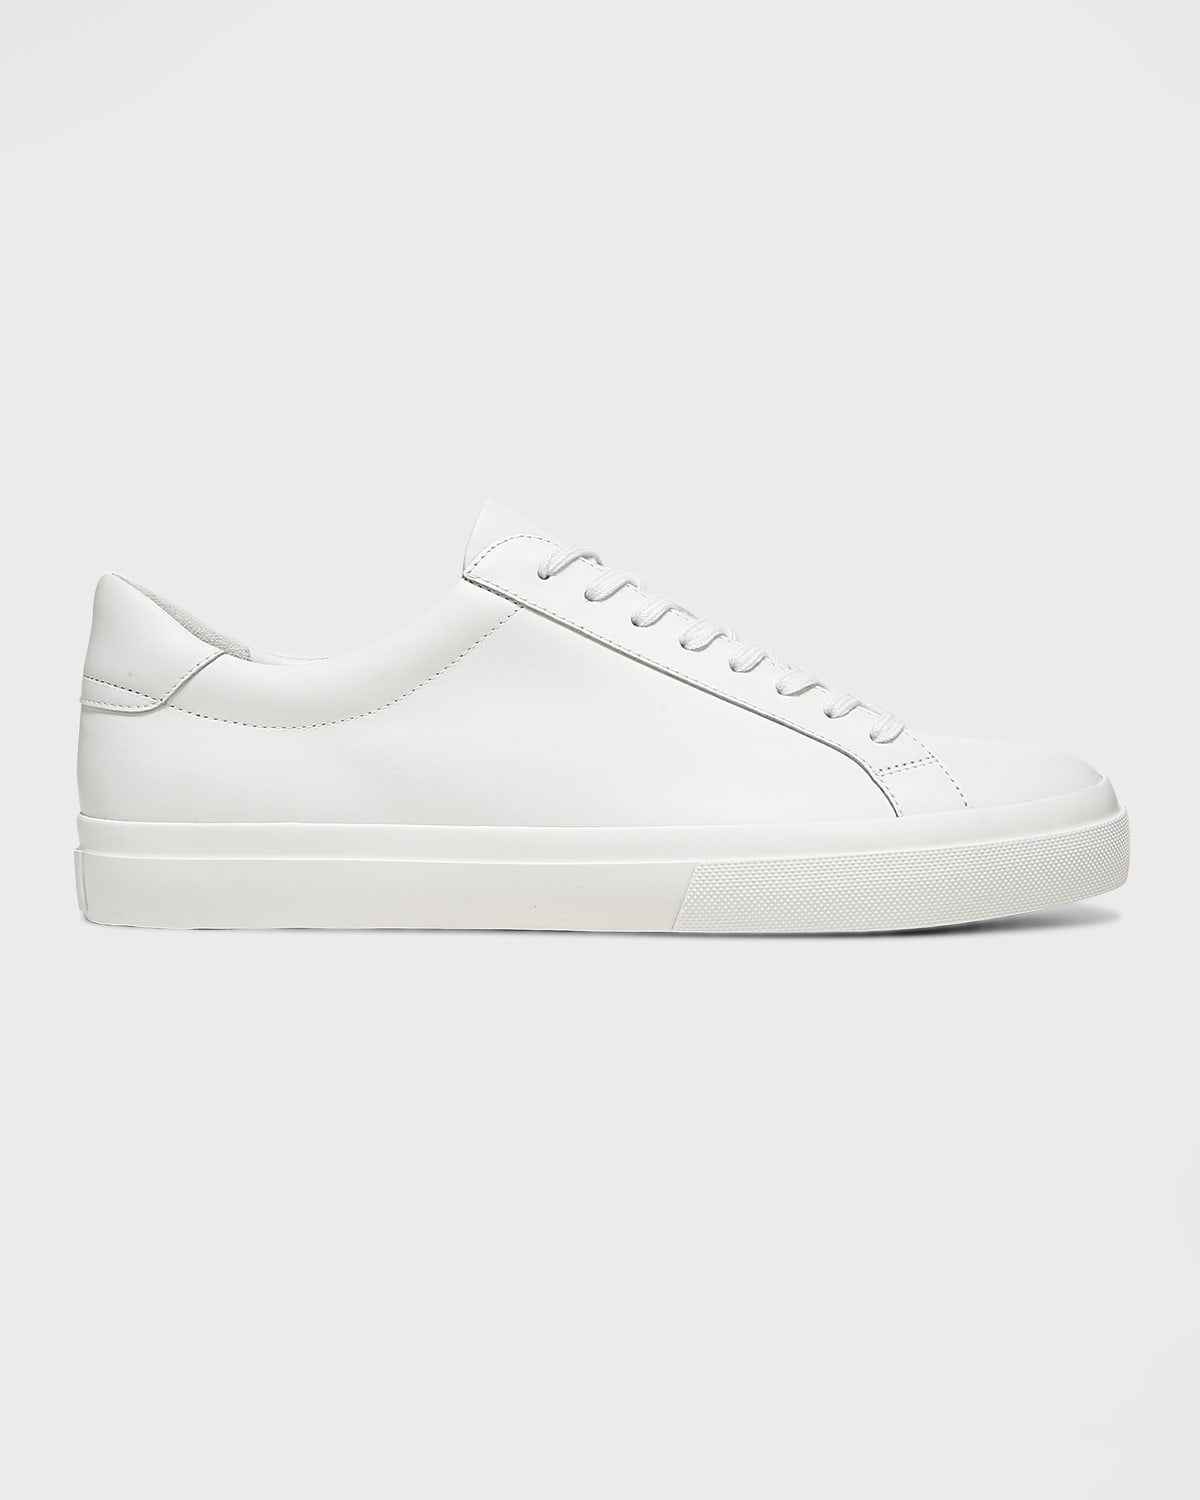 Men's Fulton Solid Leather Low-Top Sneakers